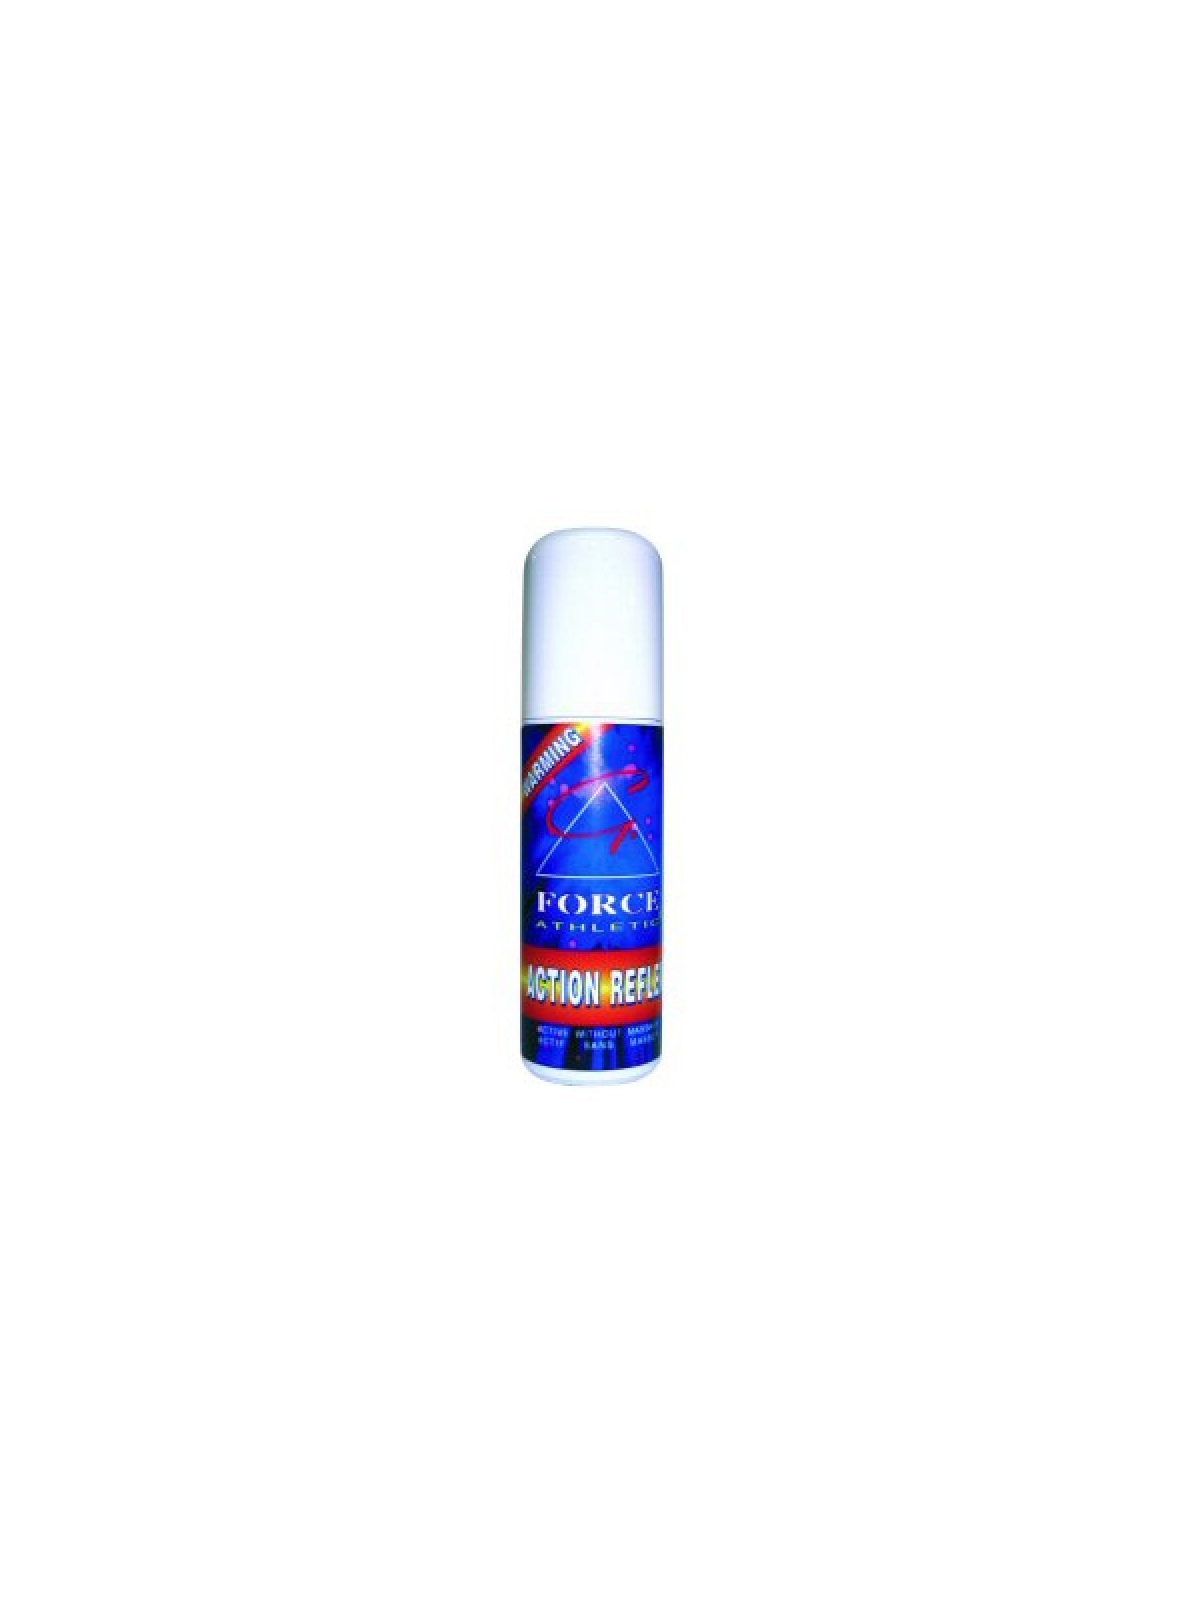 Force Athletic Action Reflex 100 ml